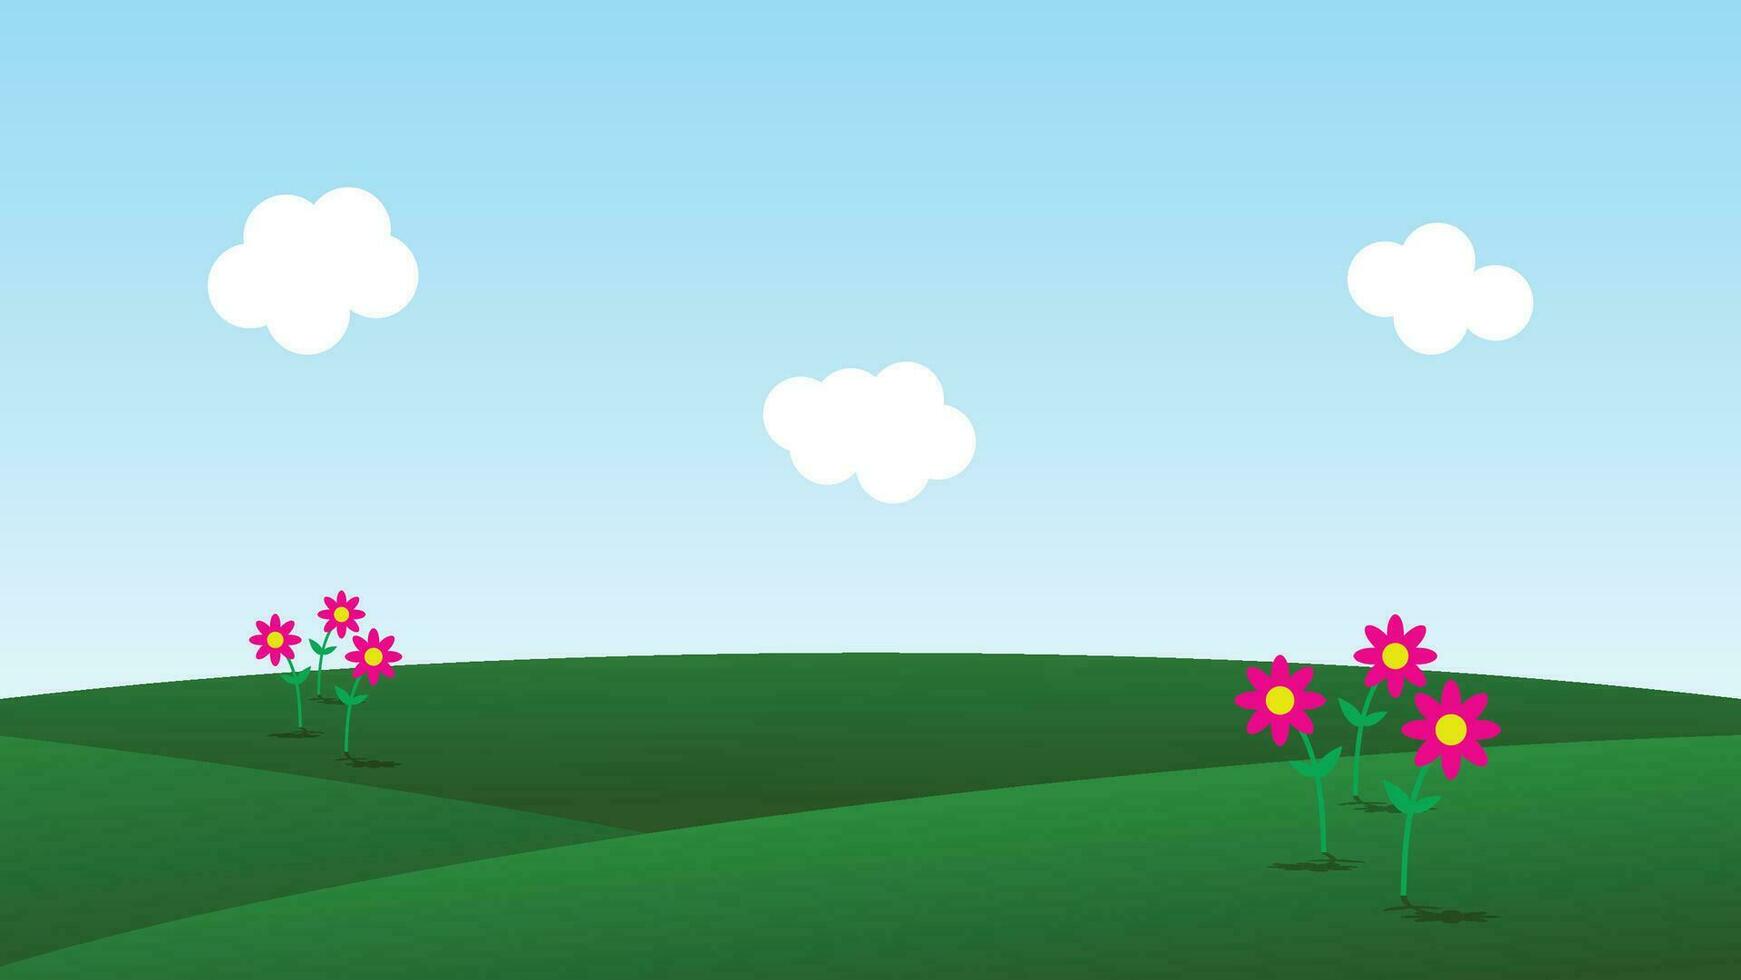 landscape cartoon scene with green hills and white cloud in summer blue sky background vector